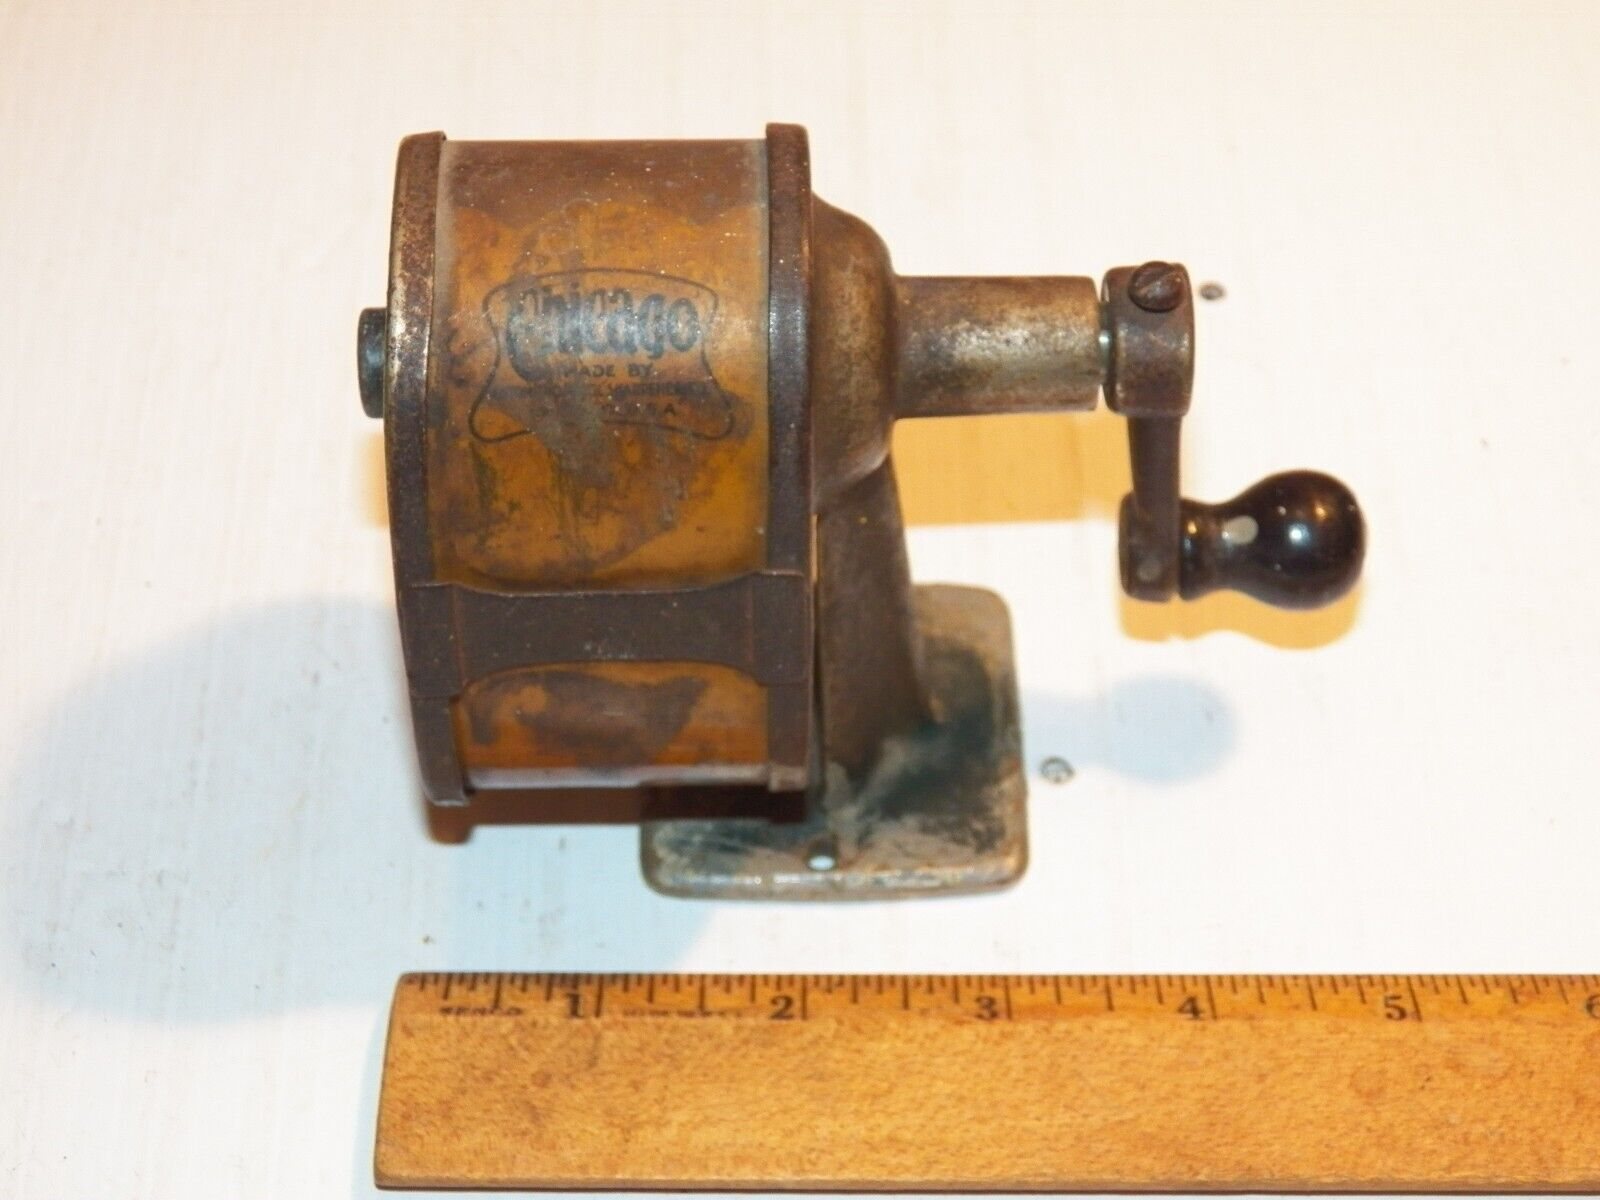 1921 CHICAGO Wall Mount Pencil Sharpener - Made in USA